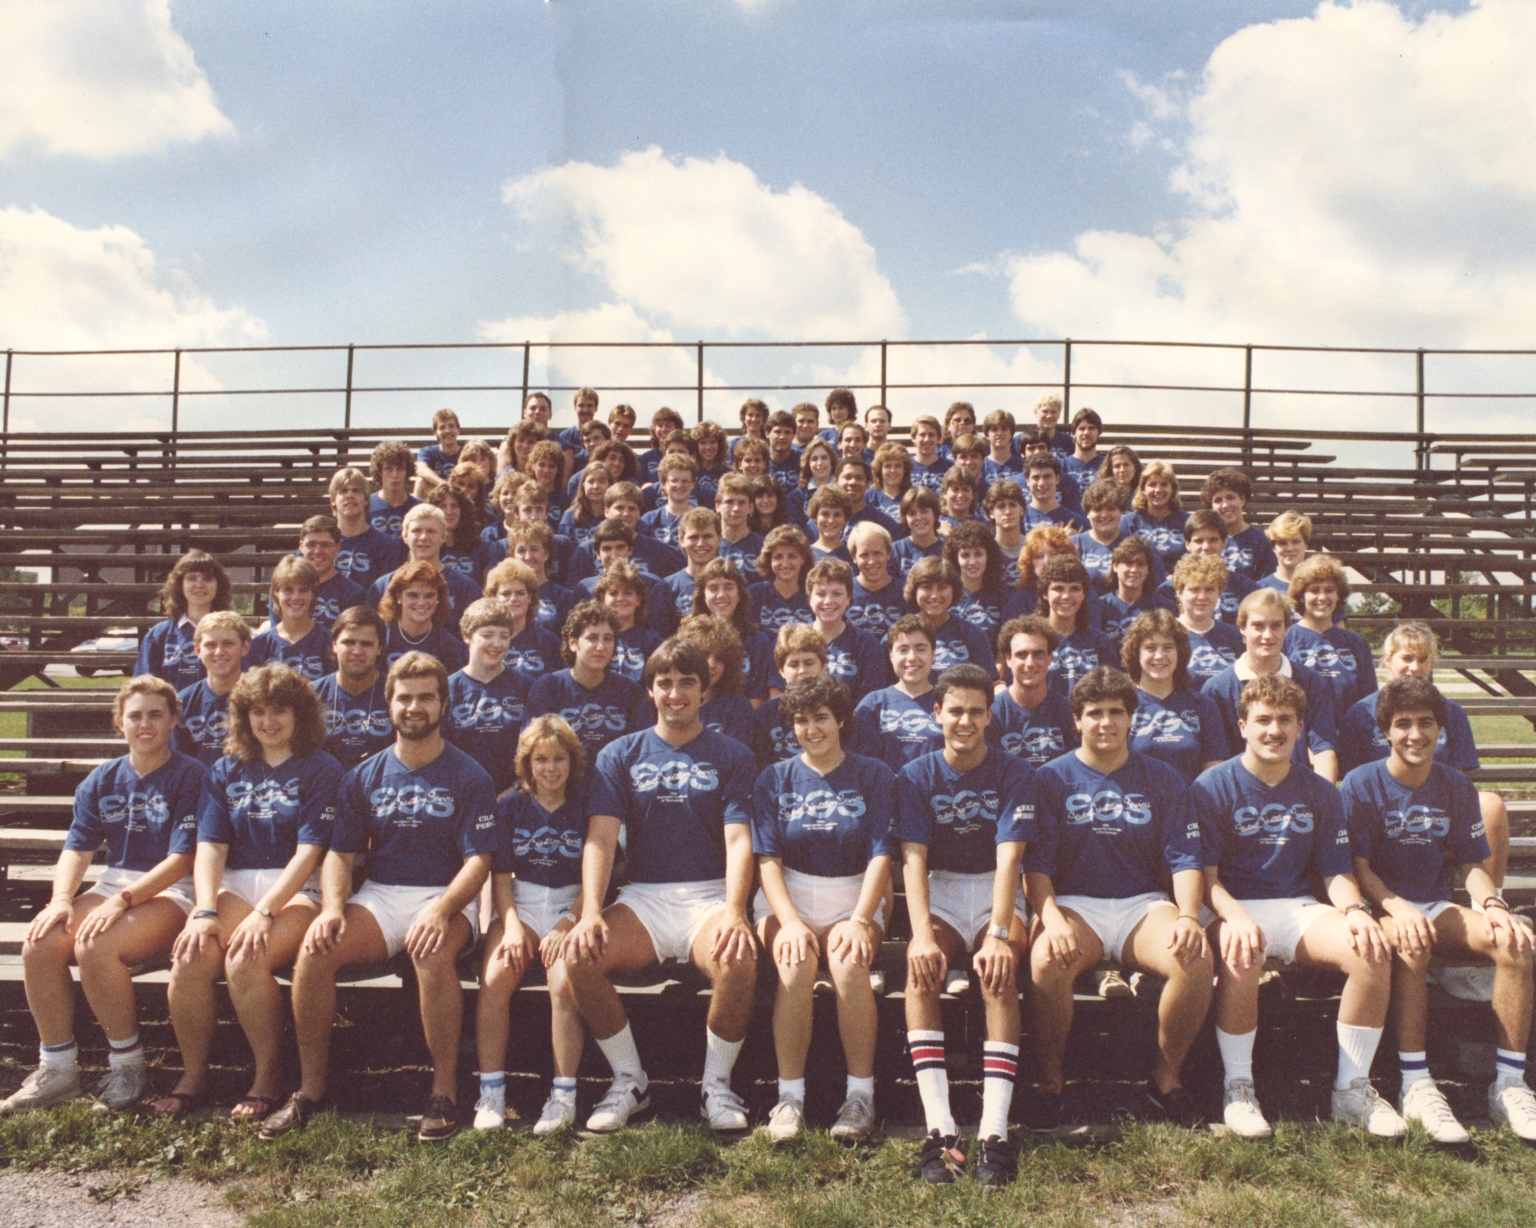 1985 Student Orientation Services Leaders